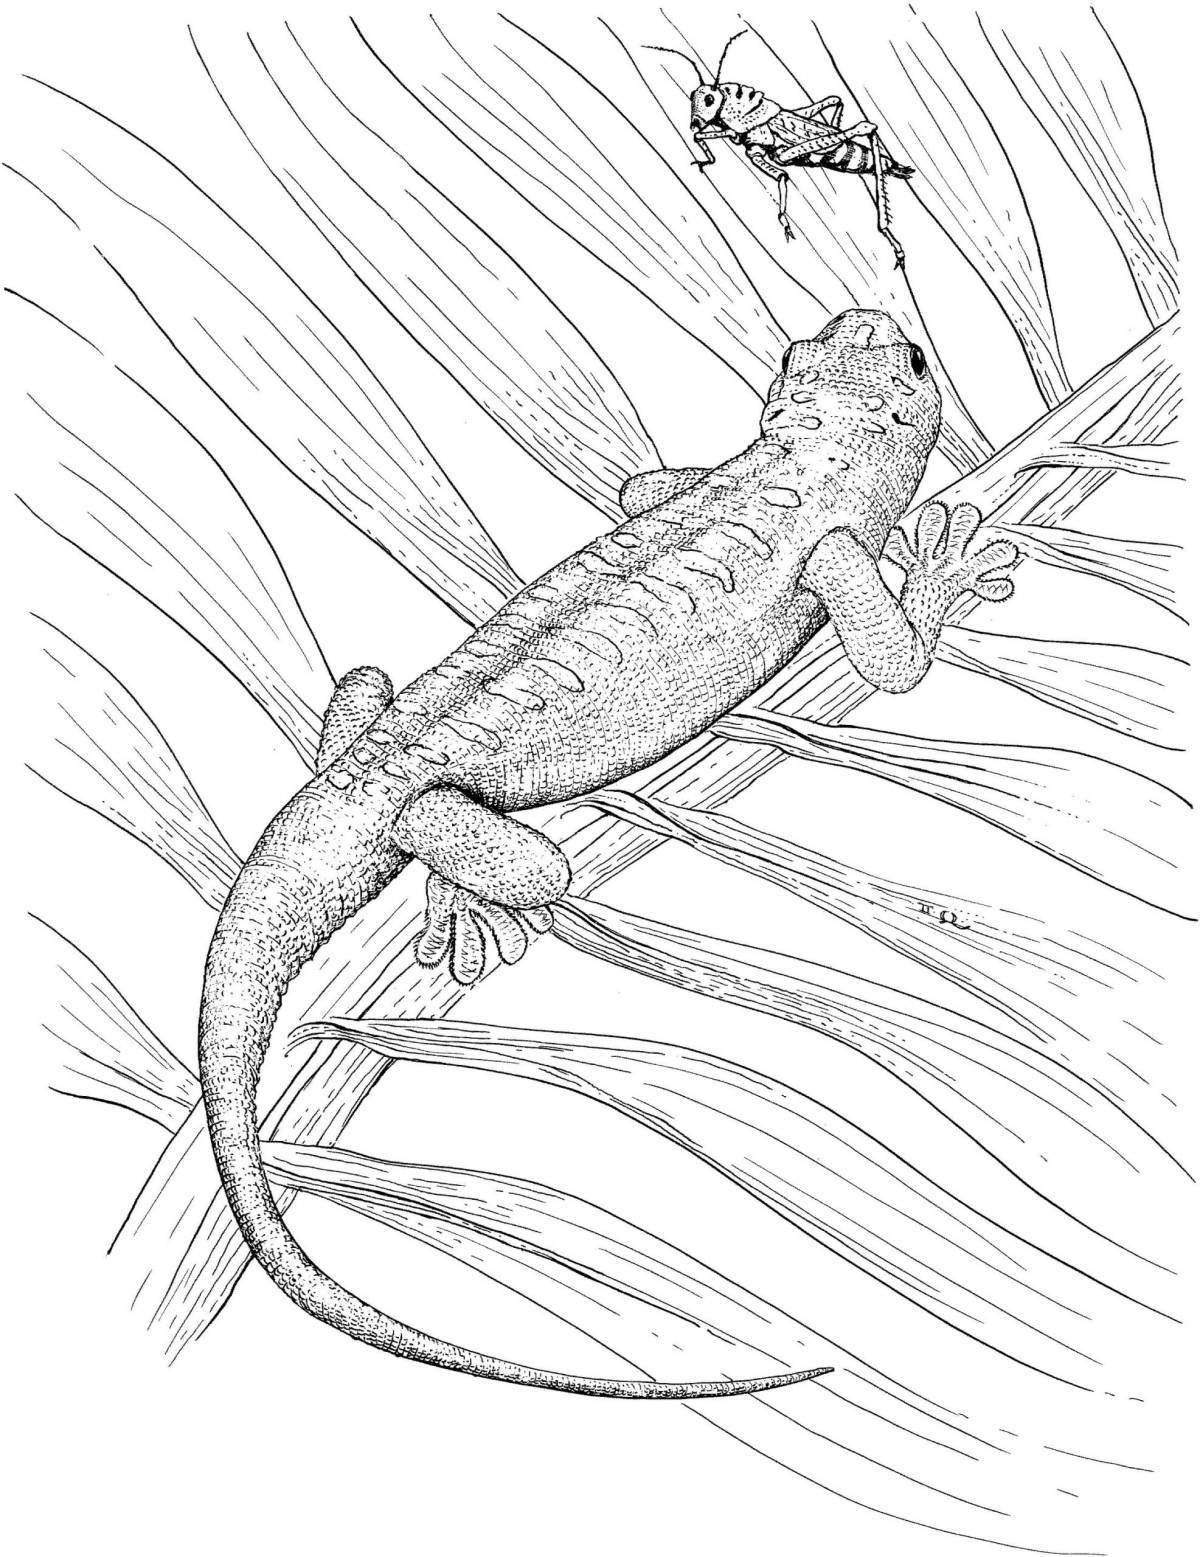 Cute common newt coloring page